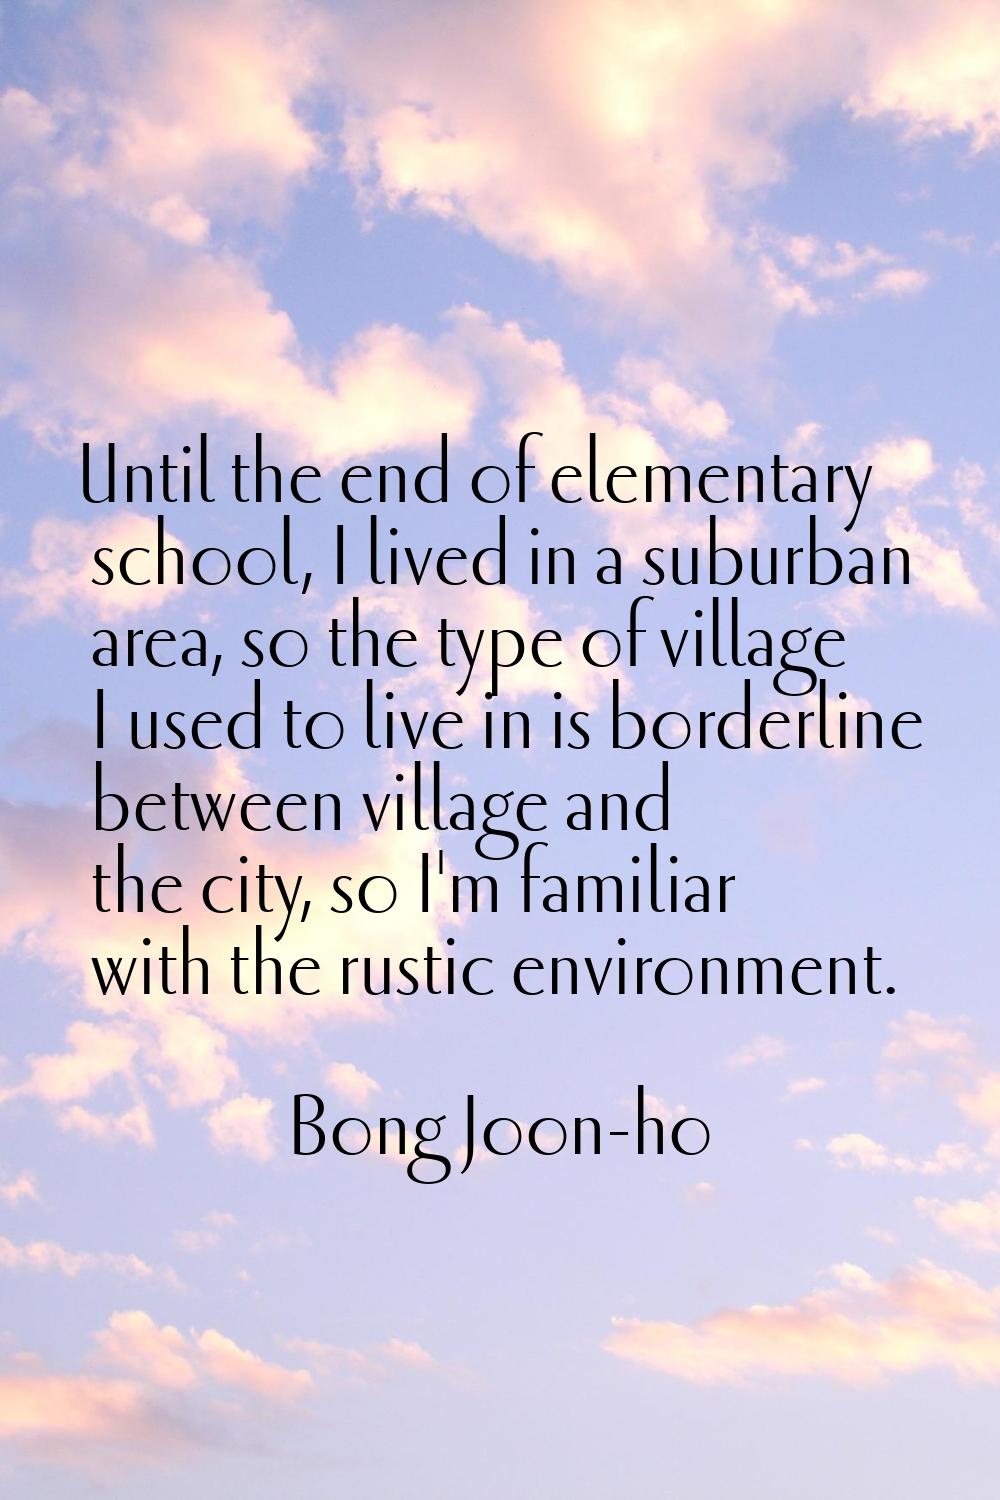 Until the end of elementary school, I lived in a suburban area, so the type of village I used to li